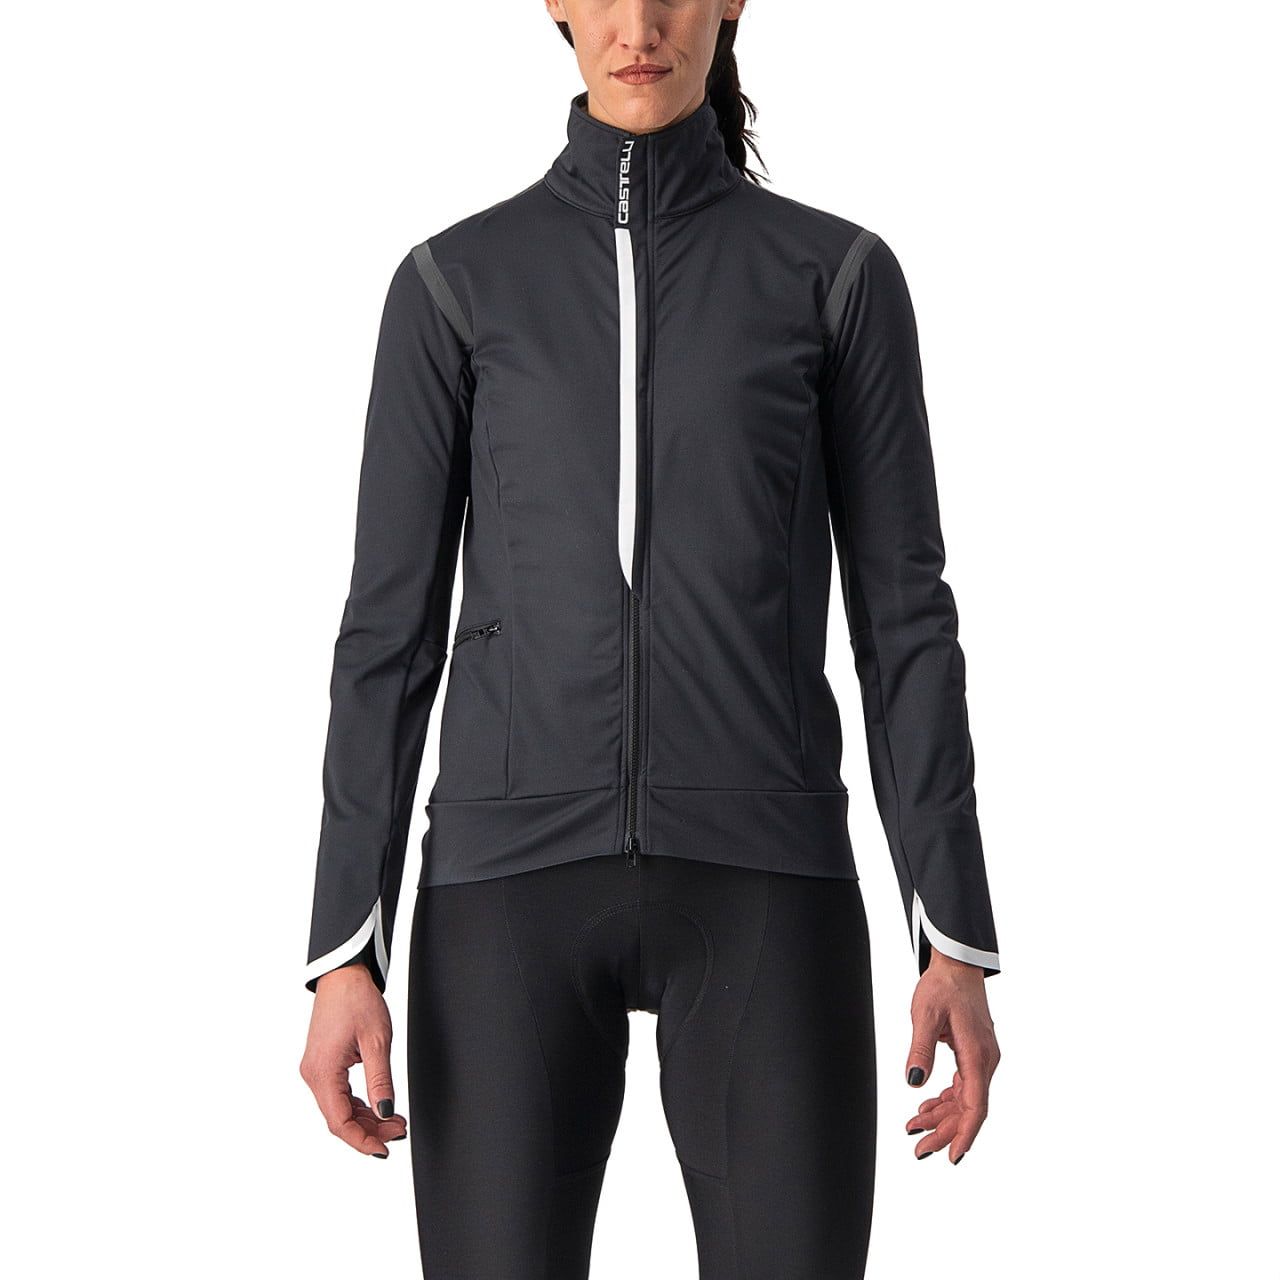 Alpha Ultimated Insulated Women's Set (2 pieces)